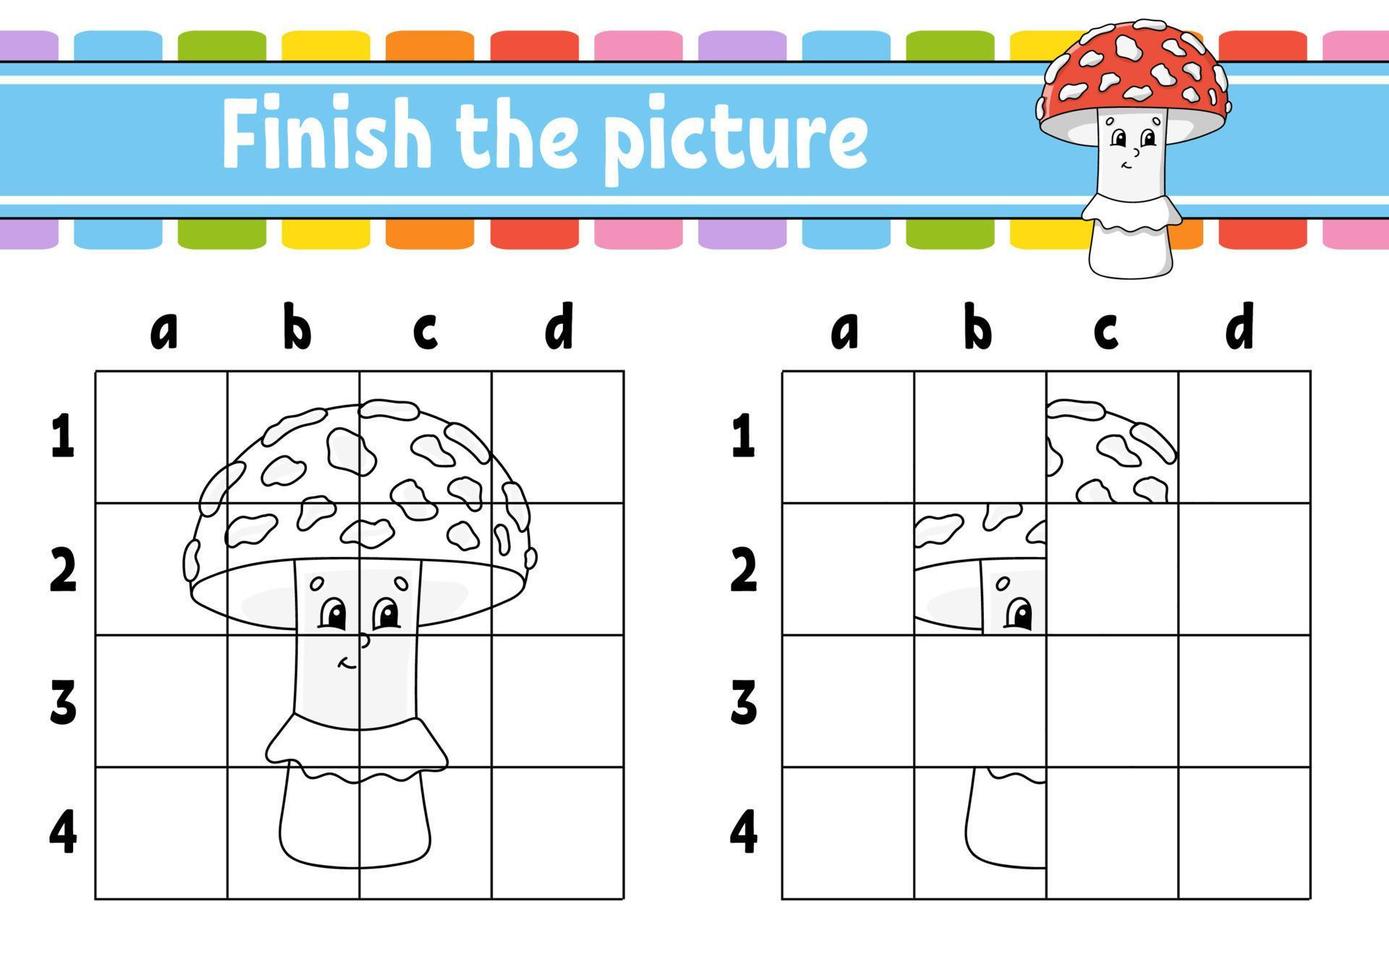 Finish the picture. Coloring book pages for kids. Education developing worksheet. Game for children. Handwriting practice. cartoon character. Vector illustration.